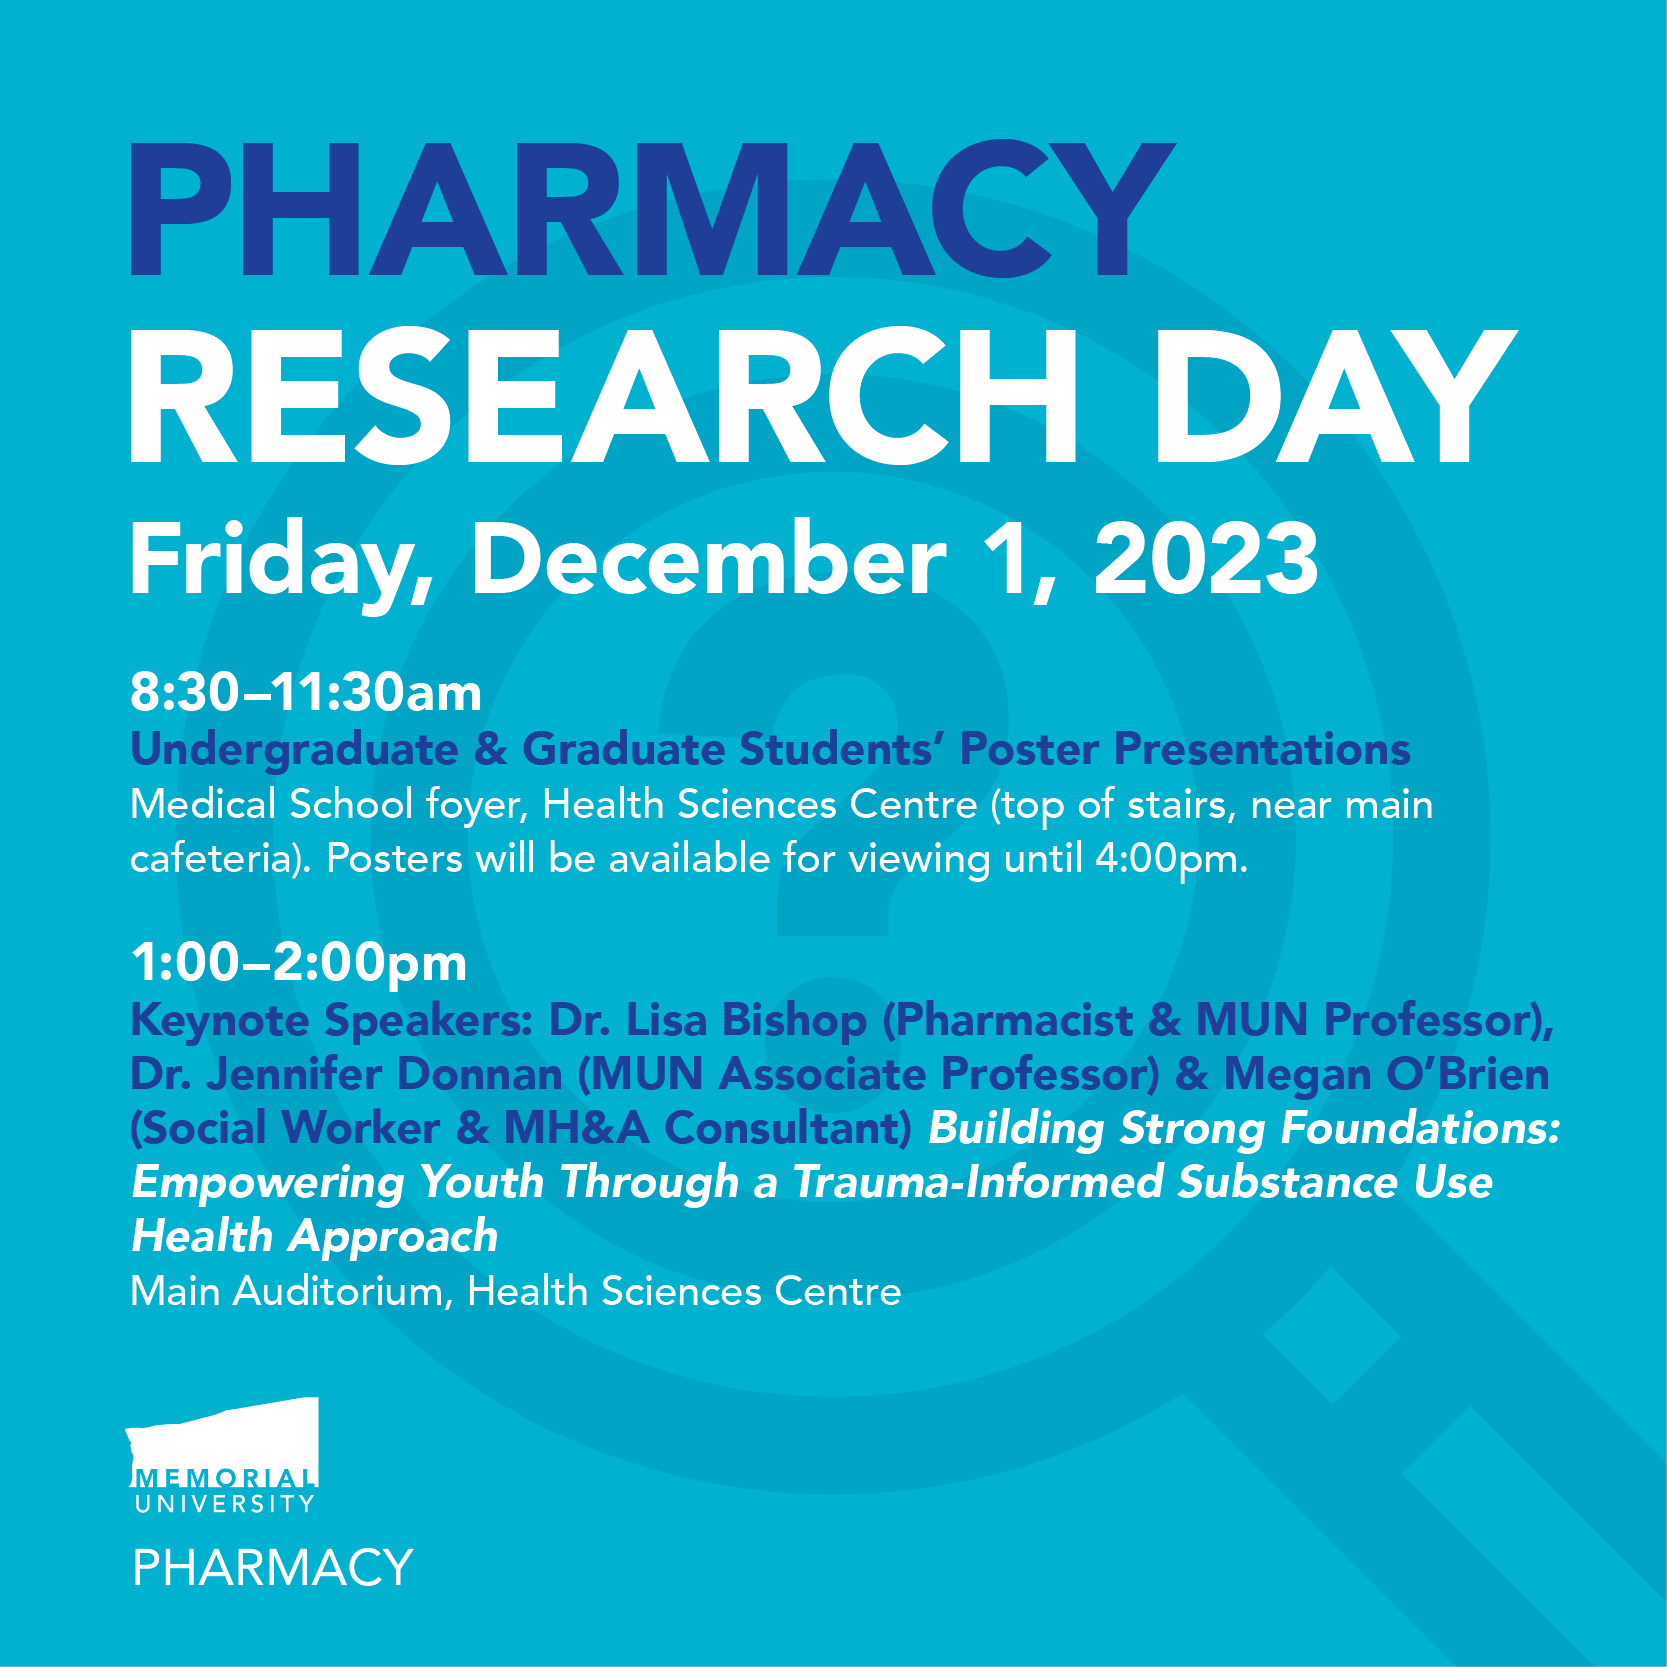 Pharmacy Research Day 2023 - Undergraduate and Graduate Students' Poster Presentations: 8:30-11:30am, and Keynote Speakers: Dr. Lisa Bishop, Dr. Jennifer Donnan and Megan O'Brien: 1-2pm